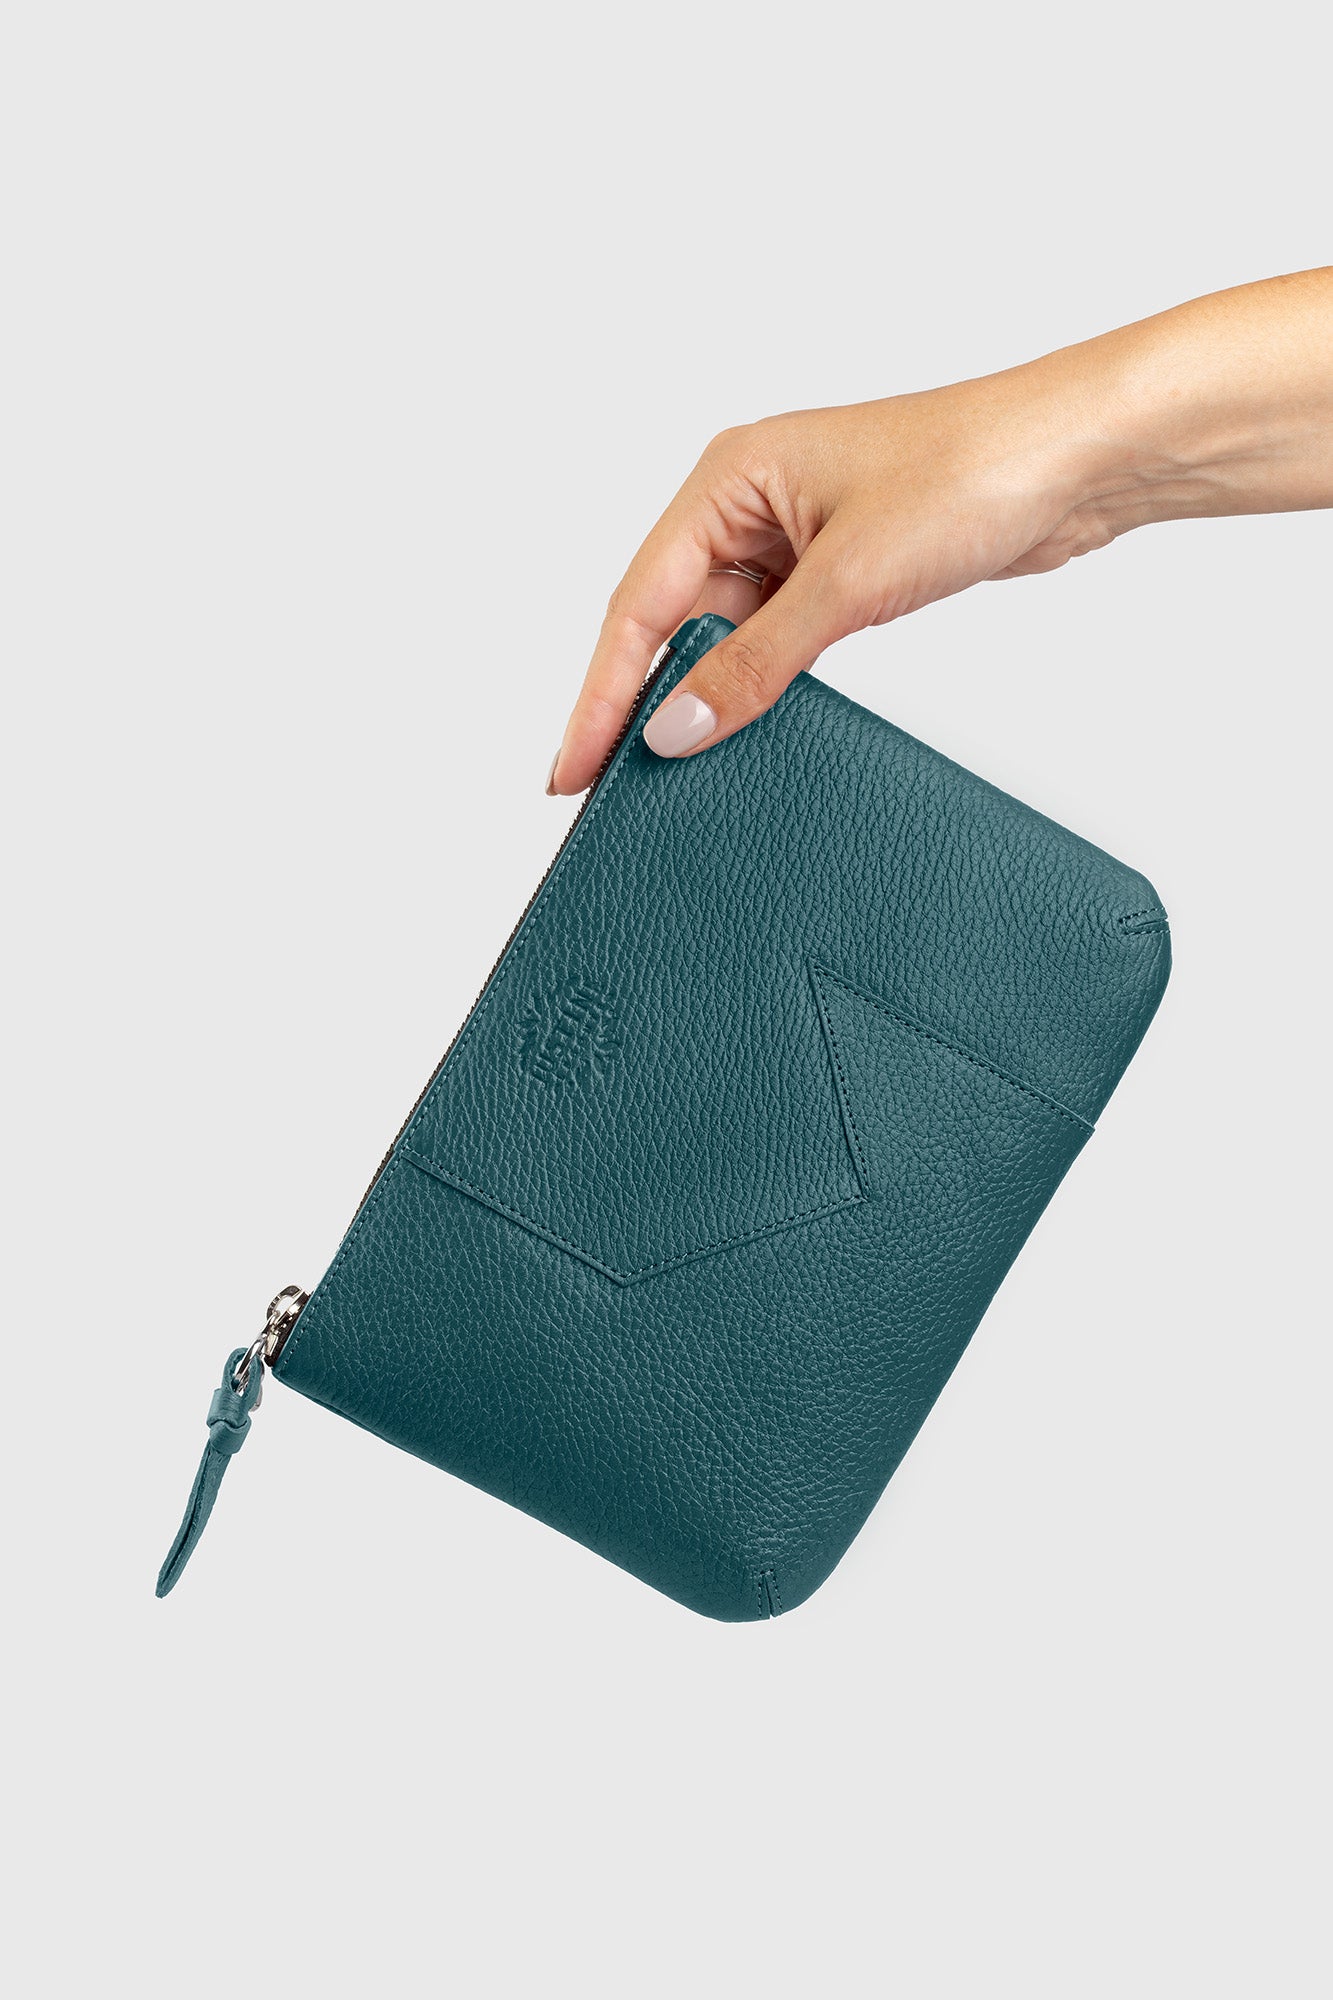 JL pouch leather - Teal green